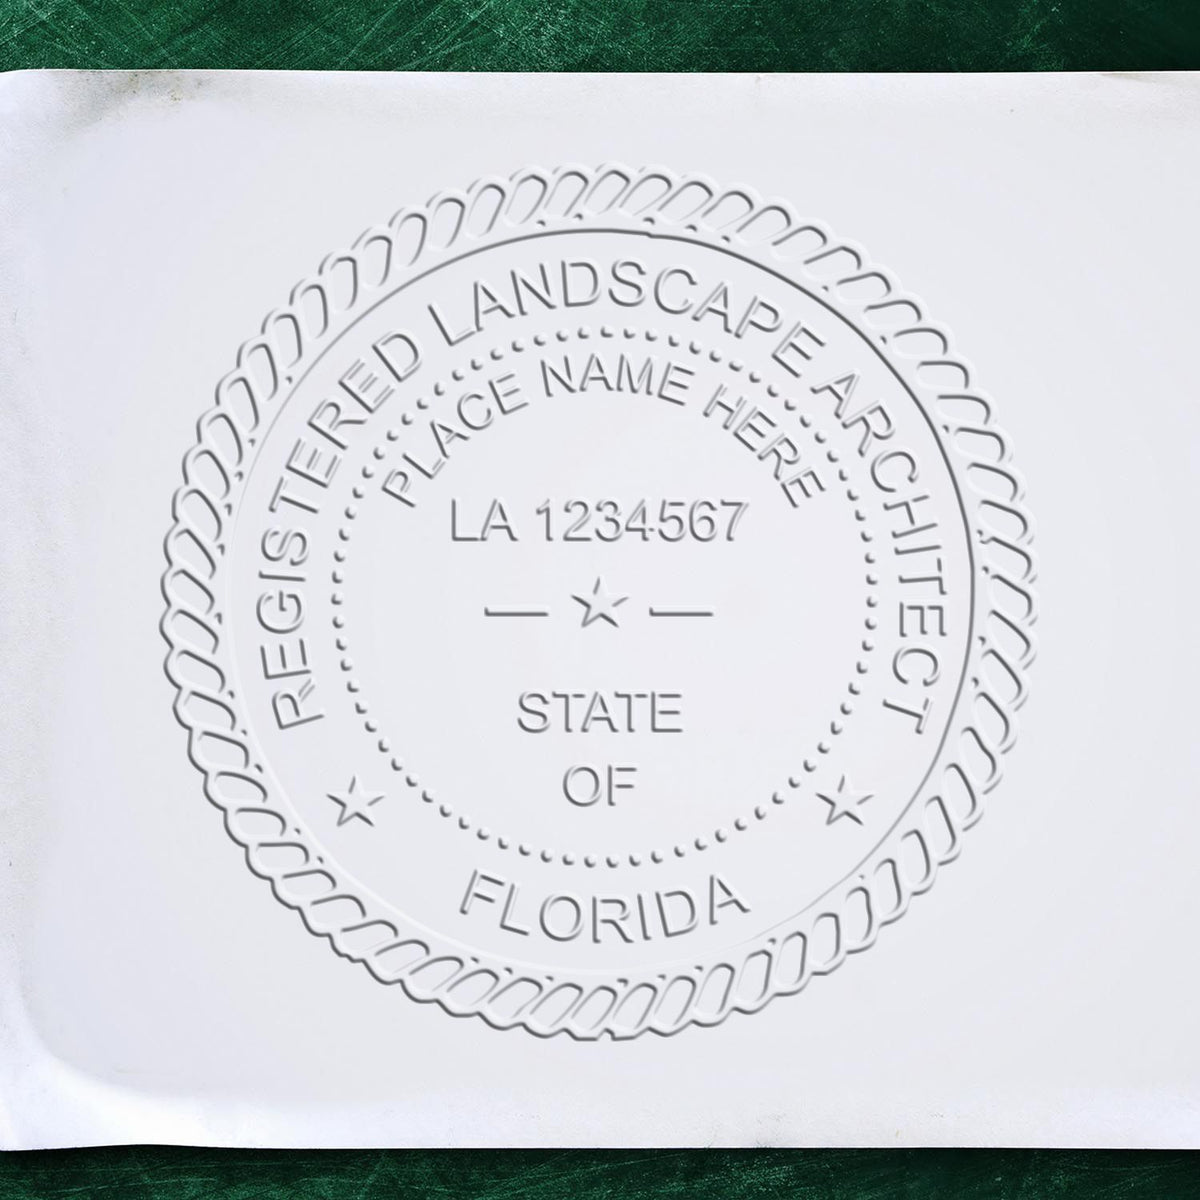 The Gift Florida Landscape Architect Seal stamp impression comes to life with a crisp, detailed image stamped on paper - showcasing true professional quality.